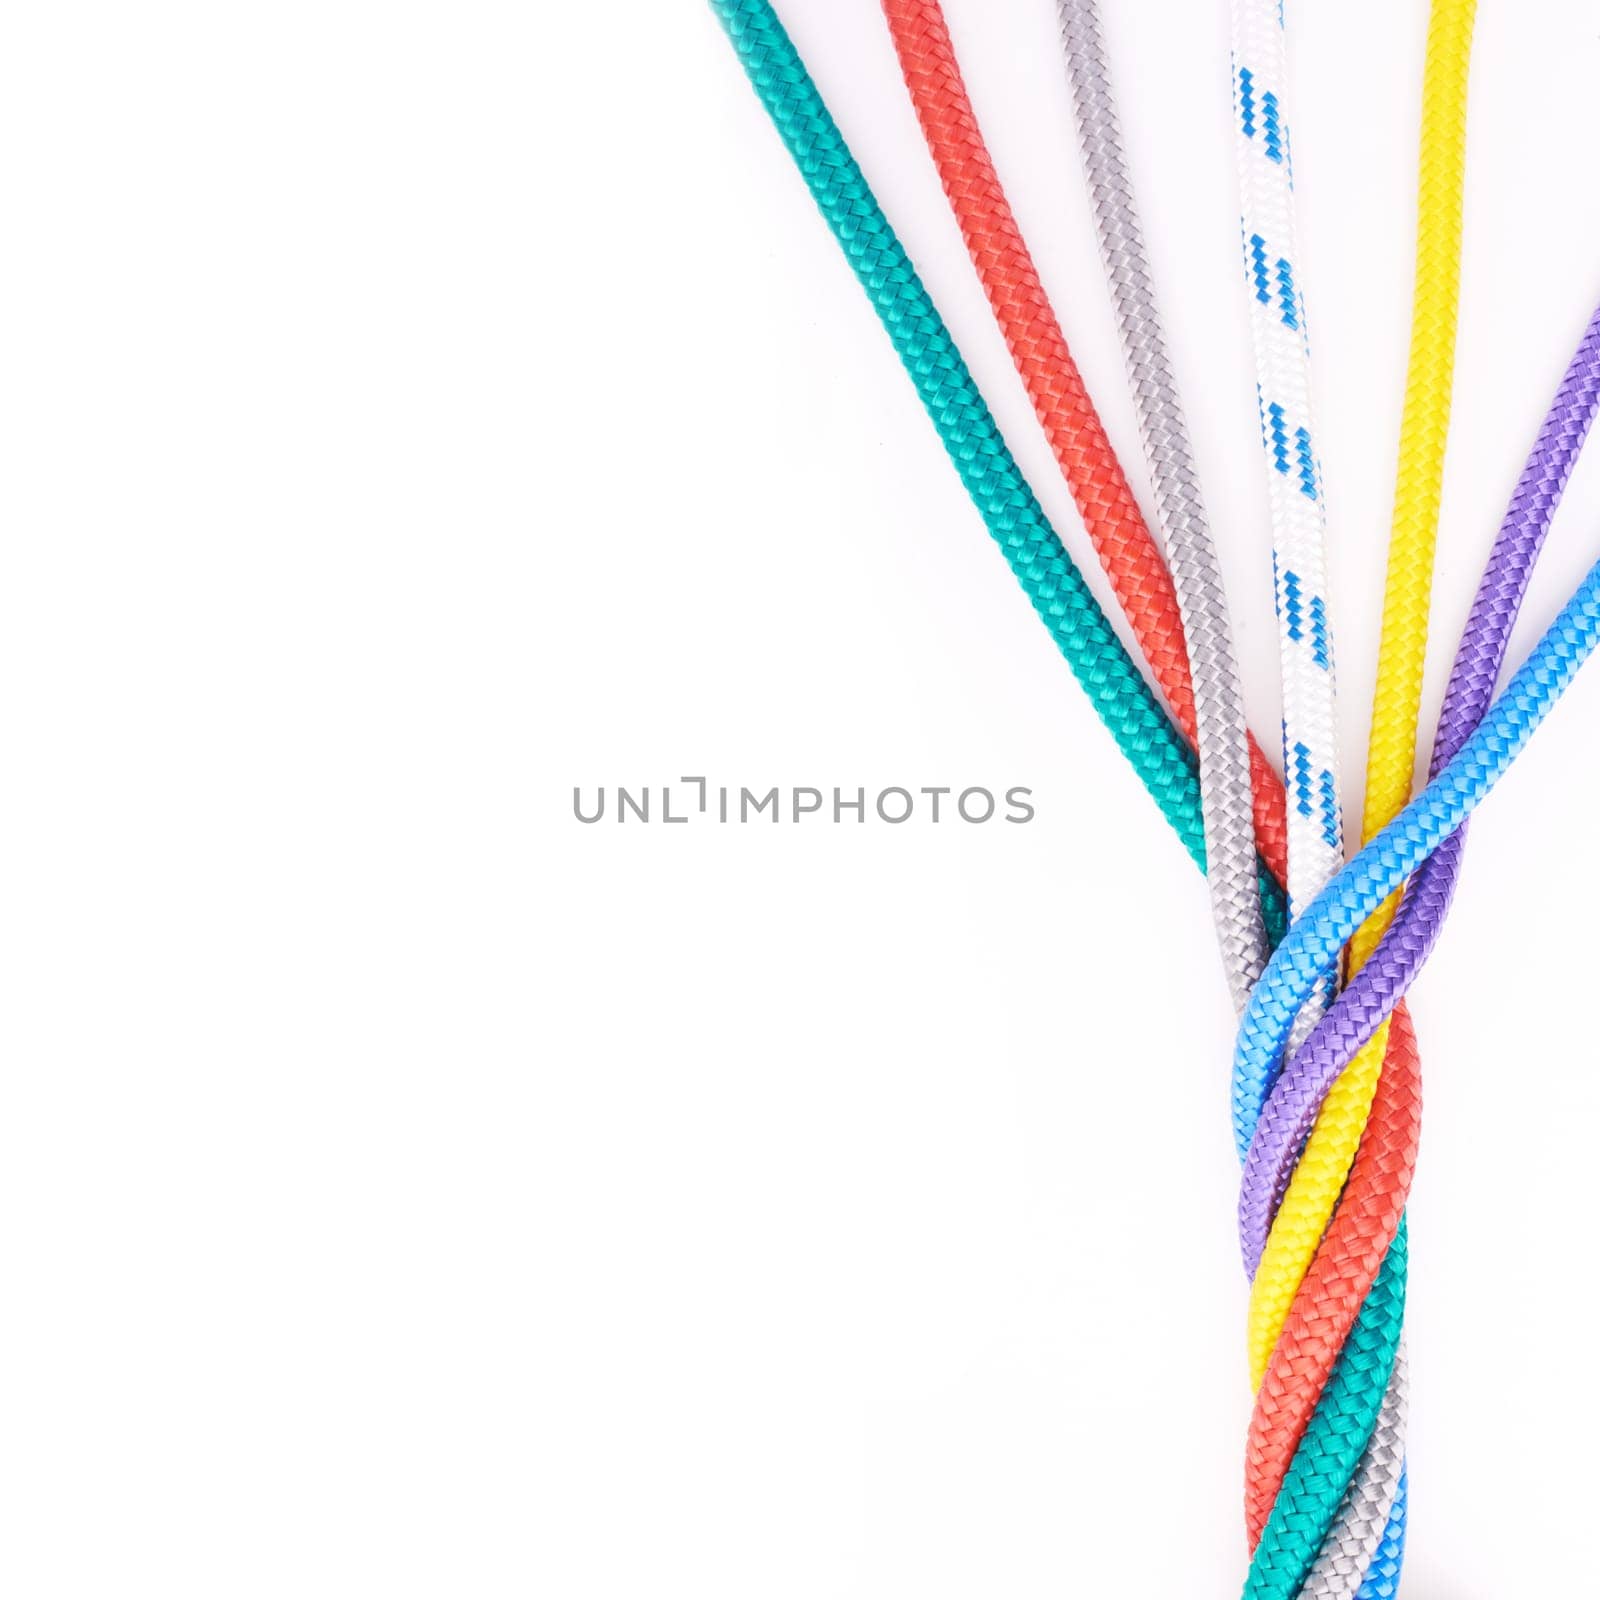 Rope, ties or connection of colorful knot or braid on white background in studio for security. Tools, cords and abstract unity of rainbow society with texture together for hiking, climbing or safety.